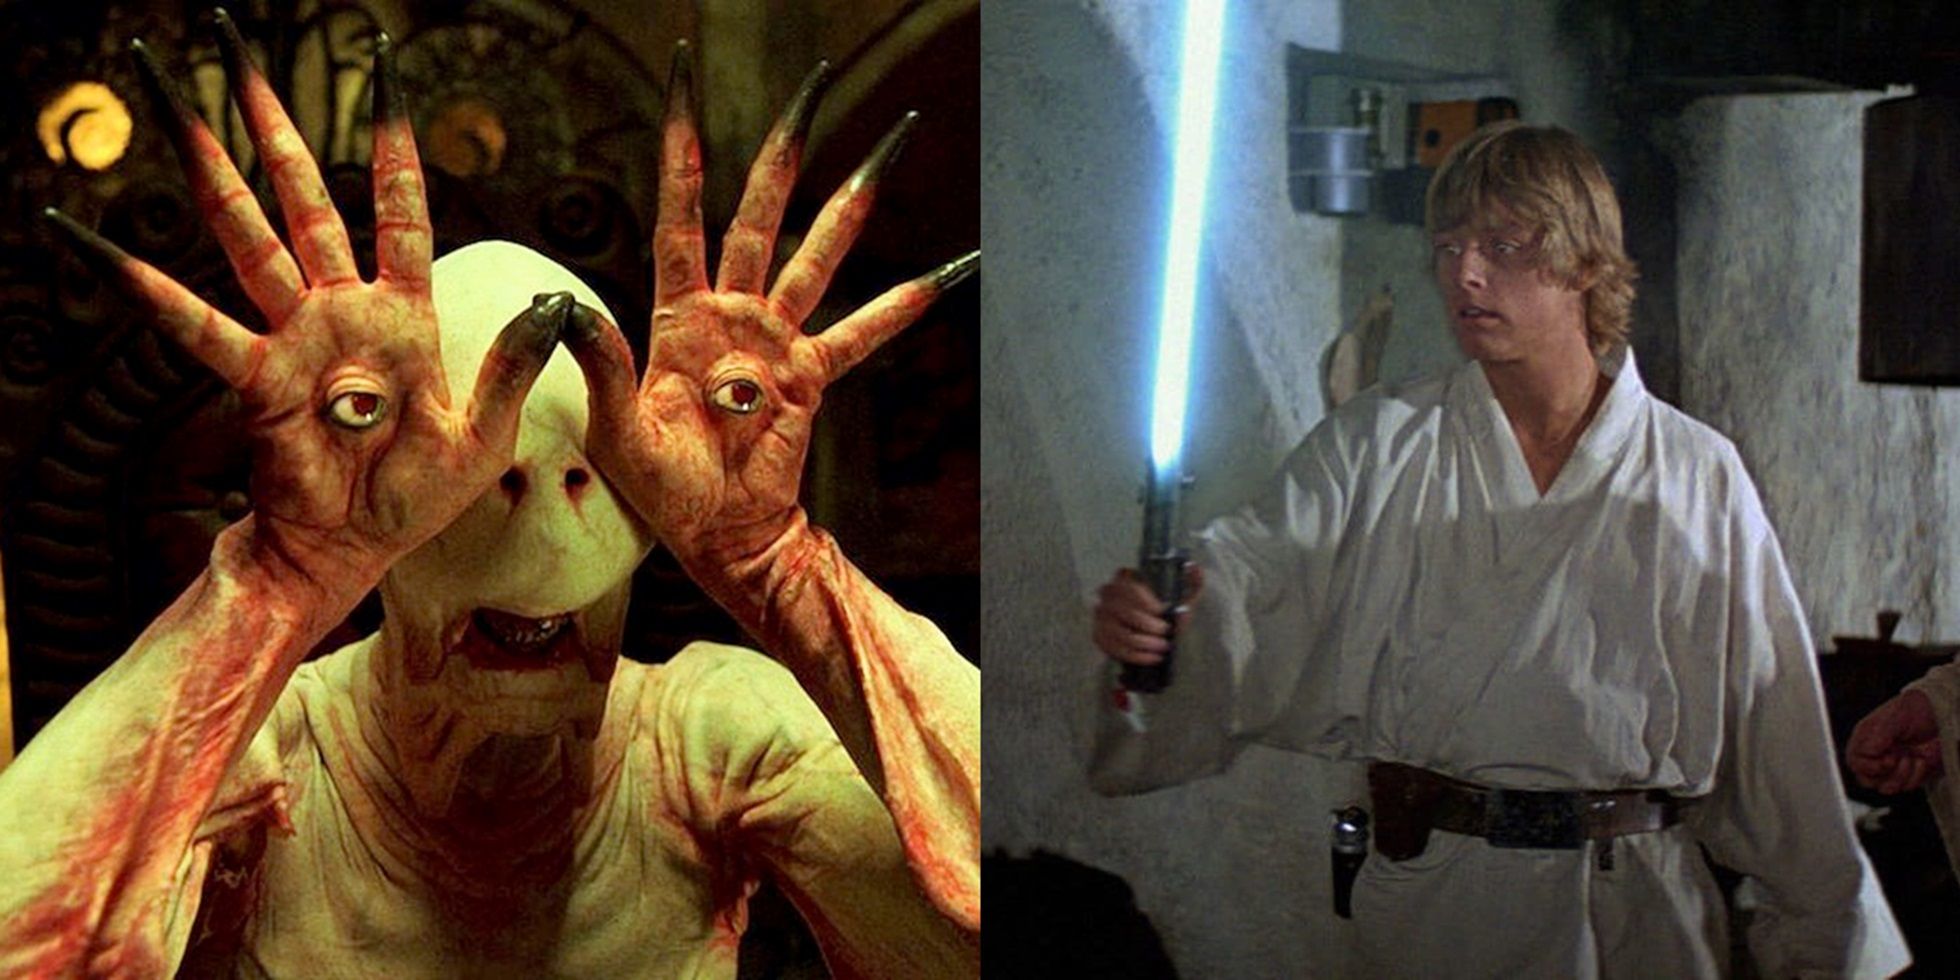 The Pale Man in Pan's Labyrinth and Luke Skywalker in Star Wars